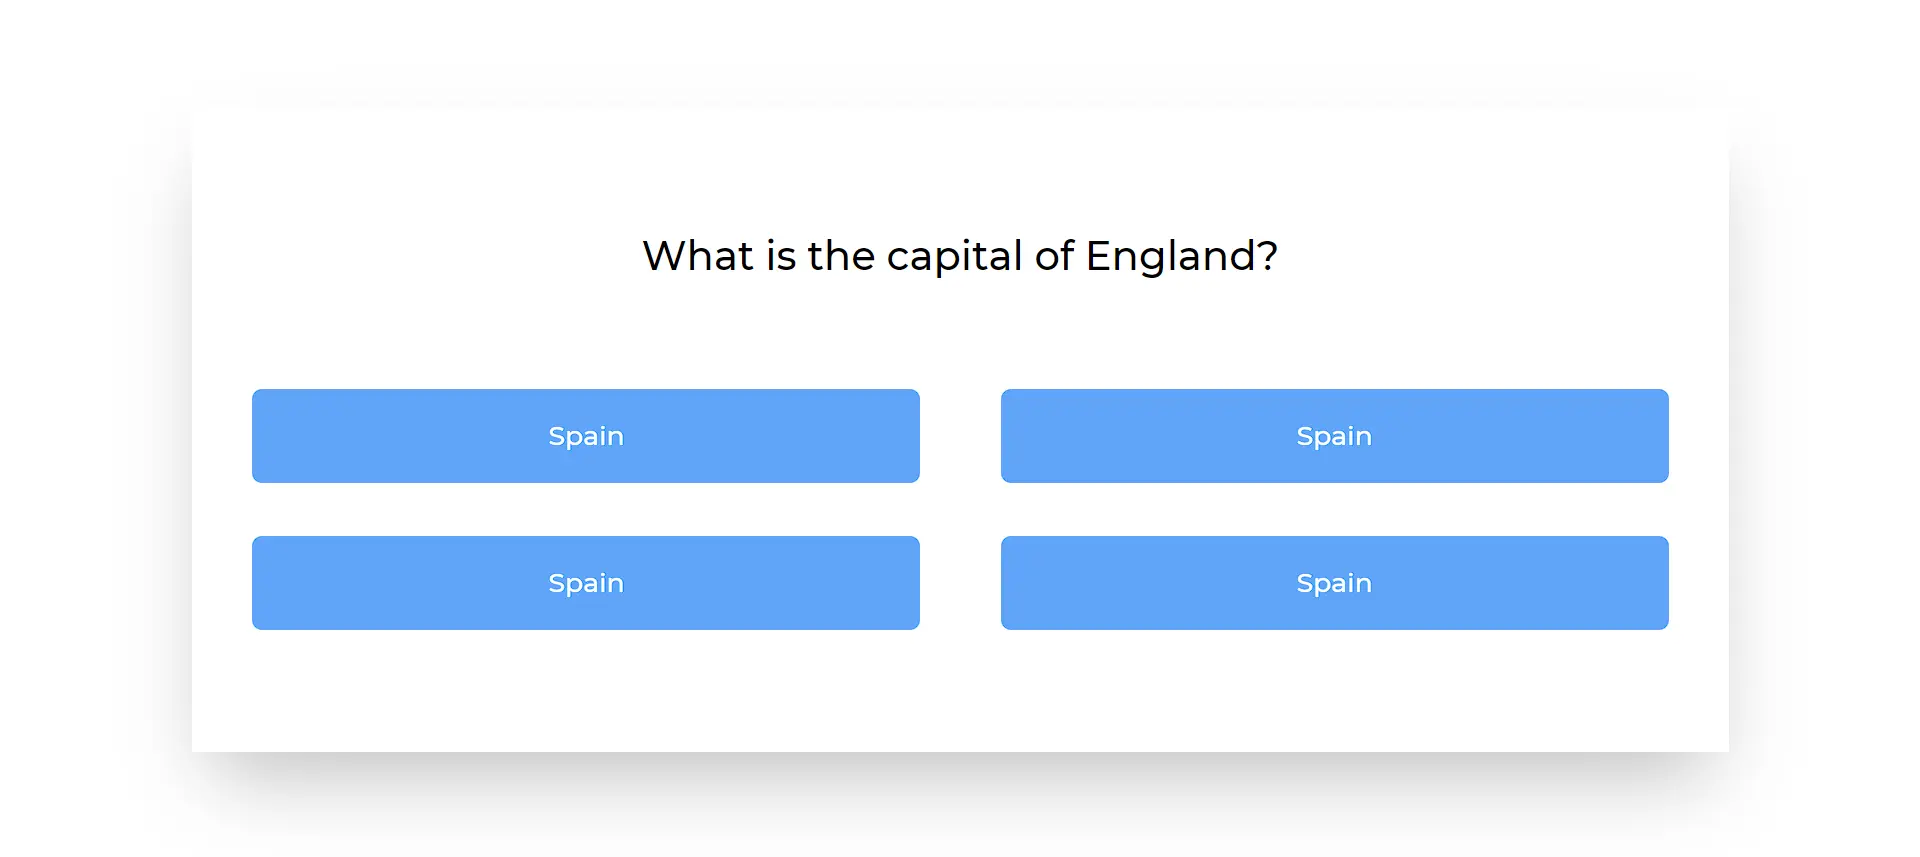 Test route question: What is the capital of England?